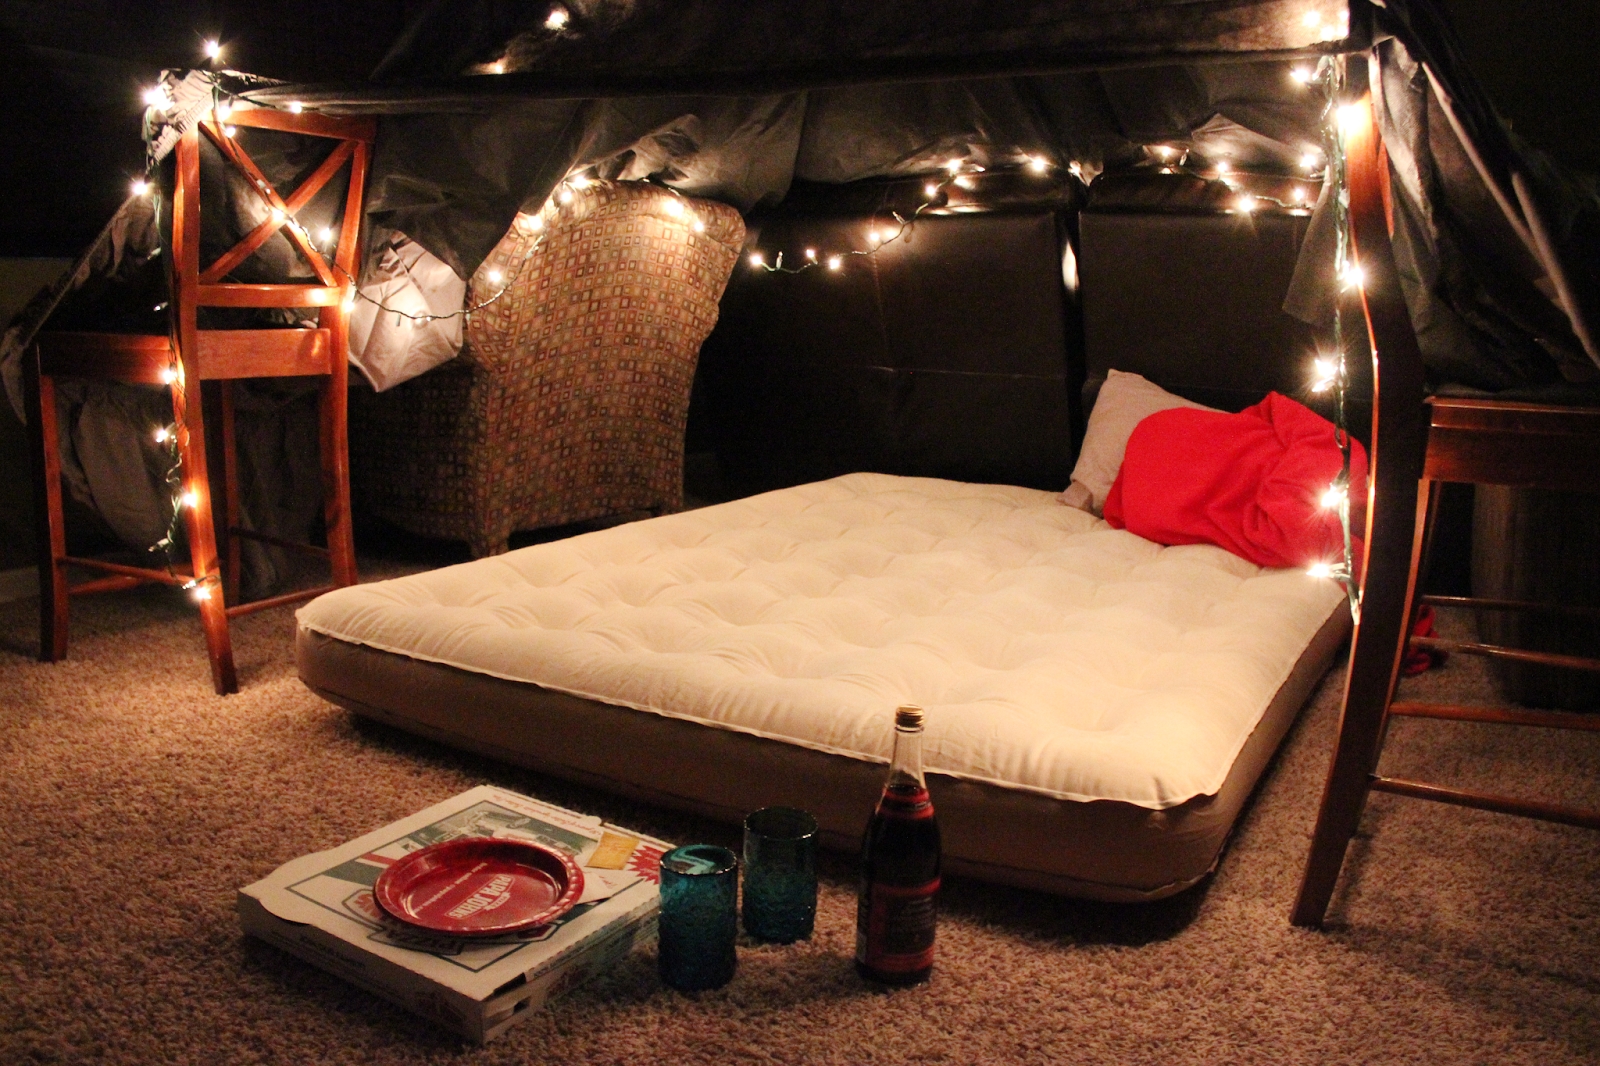 10 Unique Romantic At Home Date Ideas 12 months of dates january romantic fort night forts romantic 4 2022